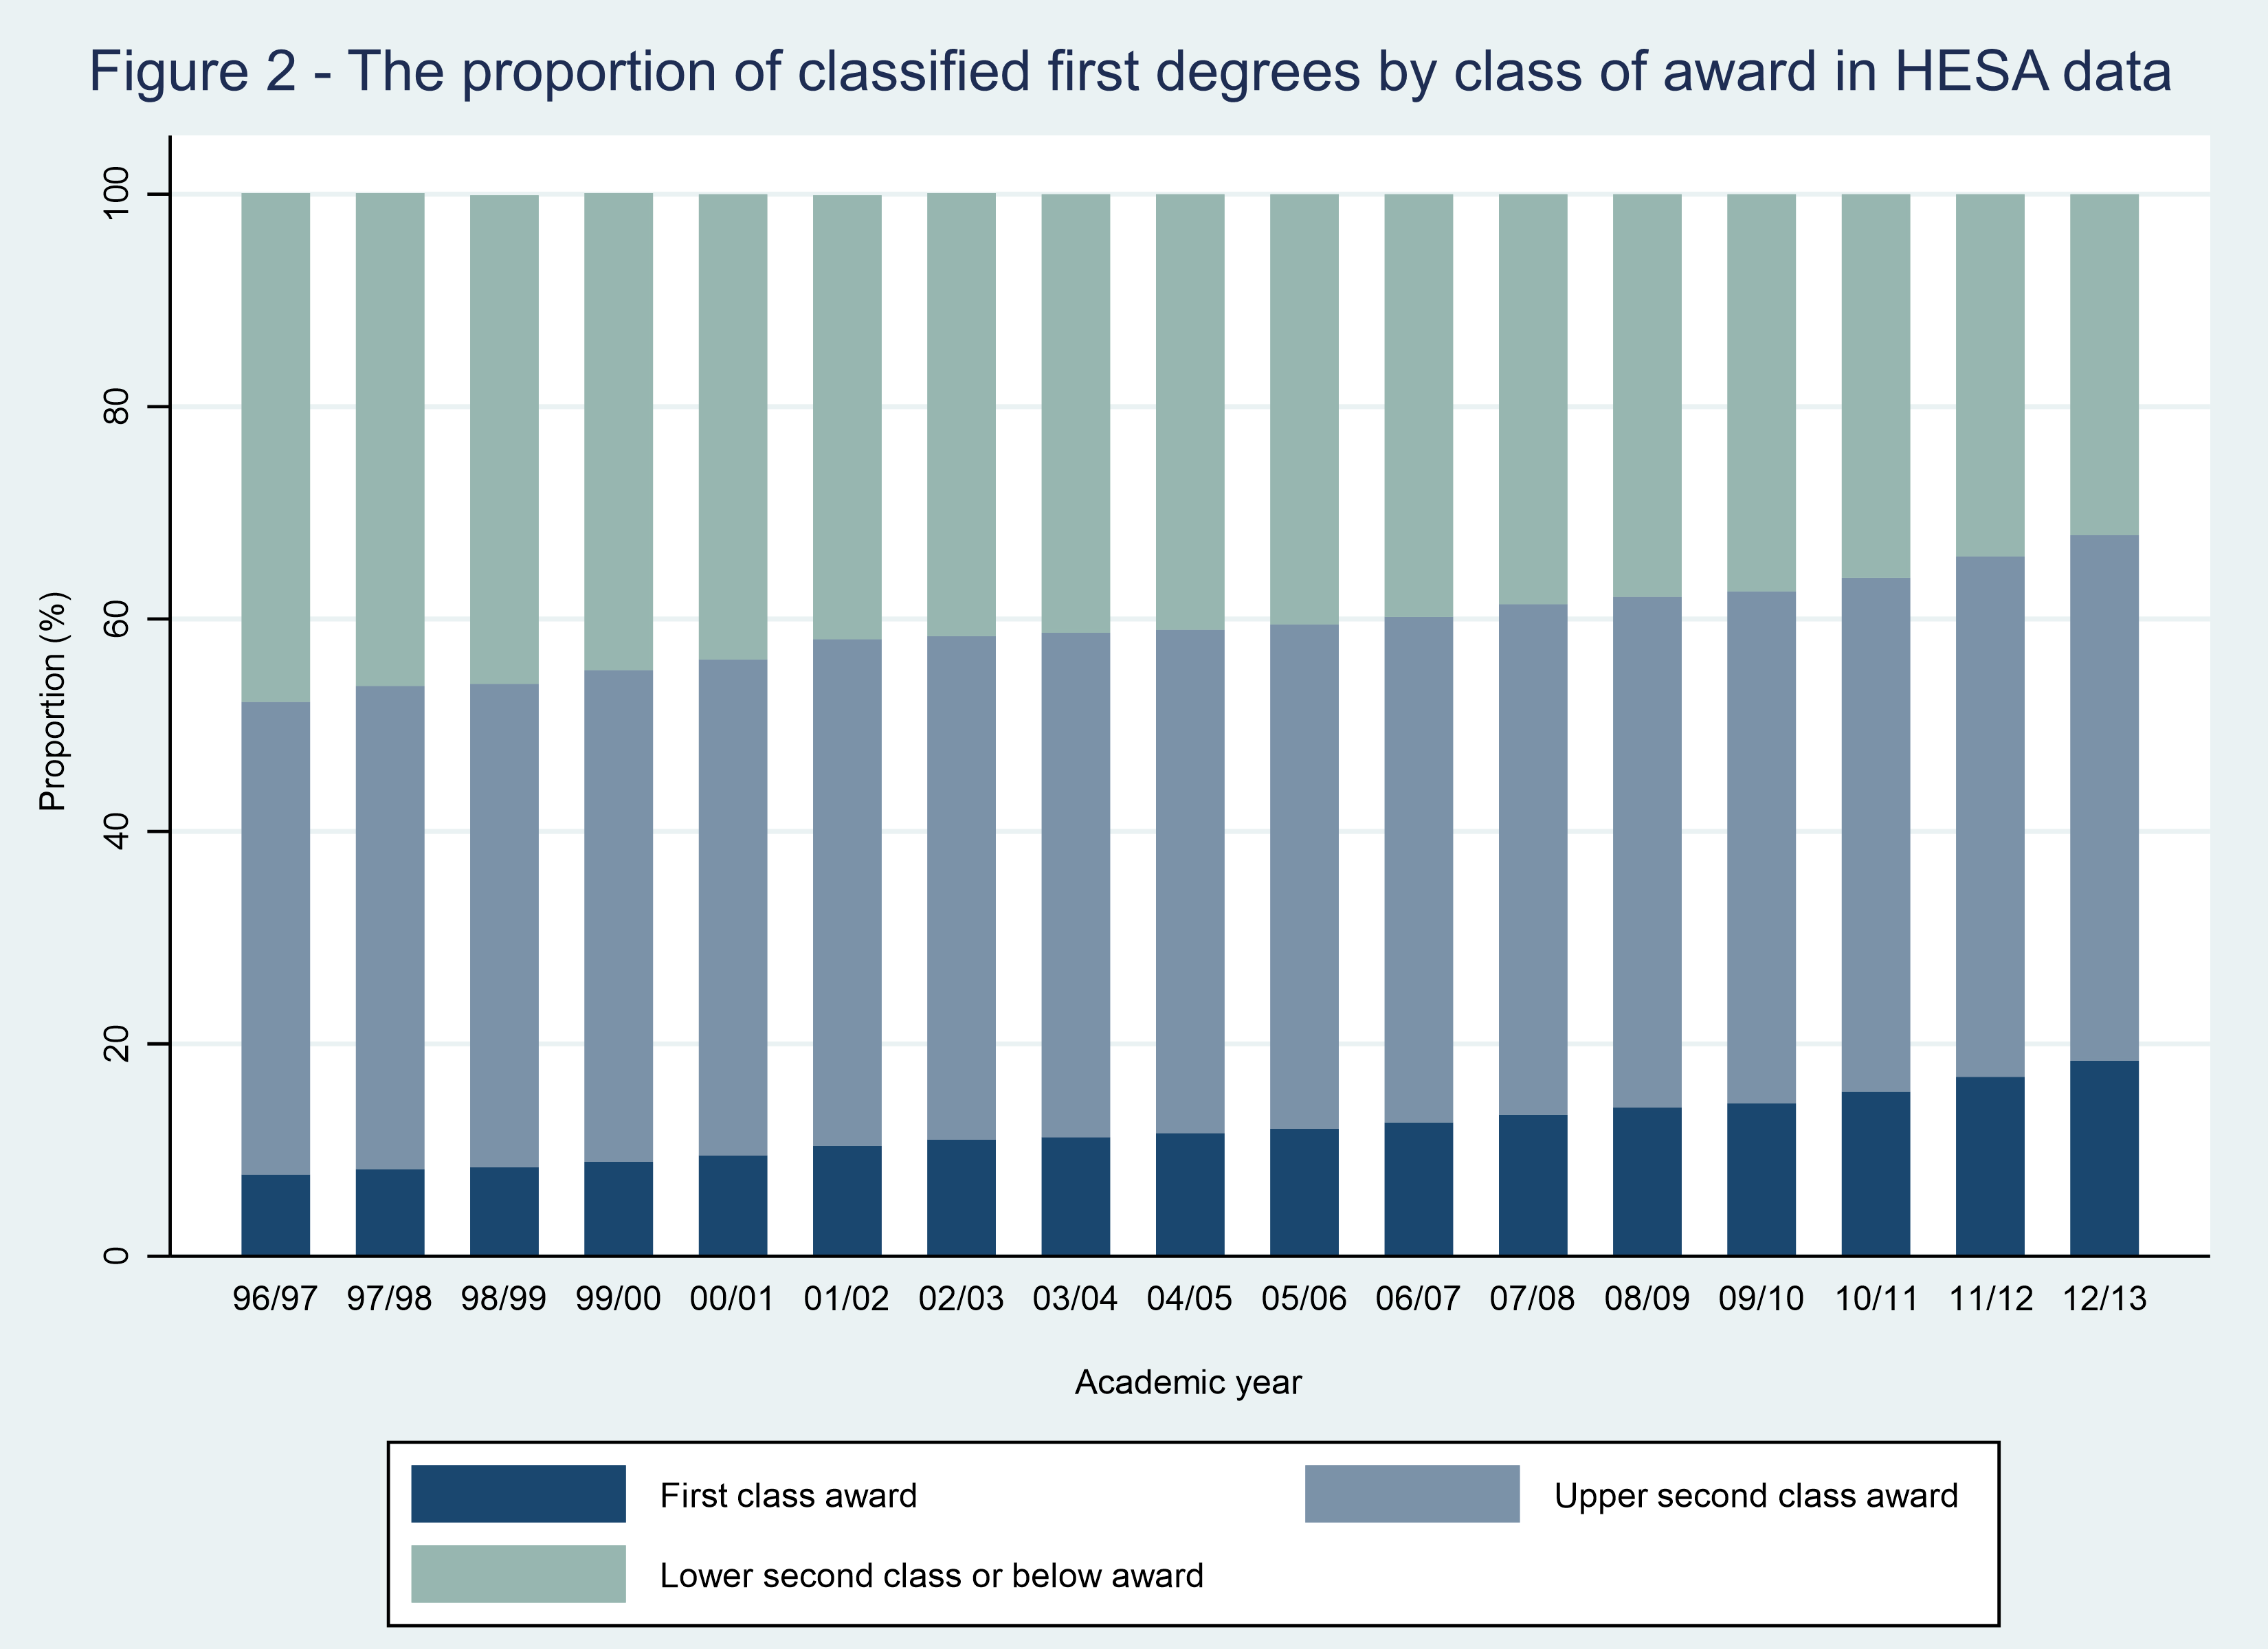 Stacked bar chart that shows the proportion of graduates awarded a first or upper second class degree rose from 52% in 1997 to 68% in 2013.